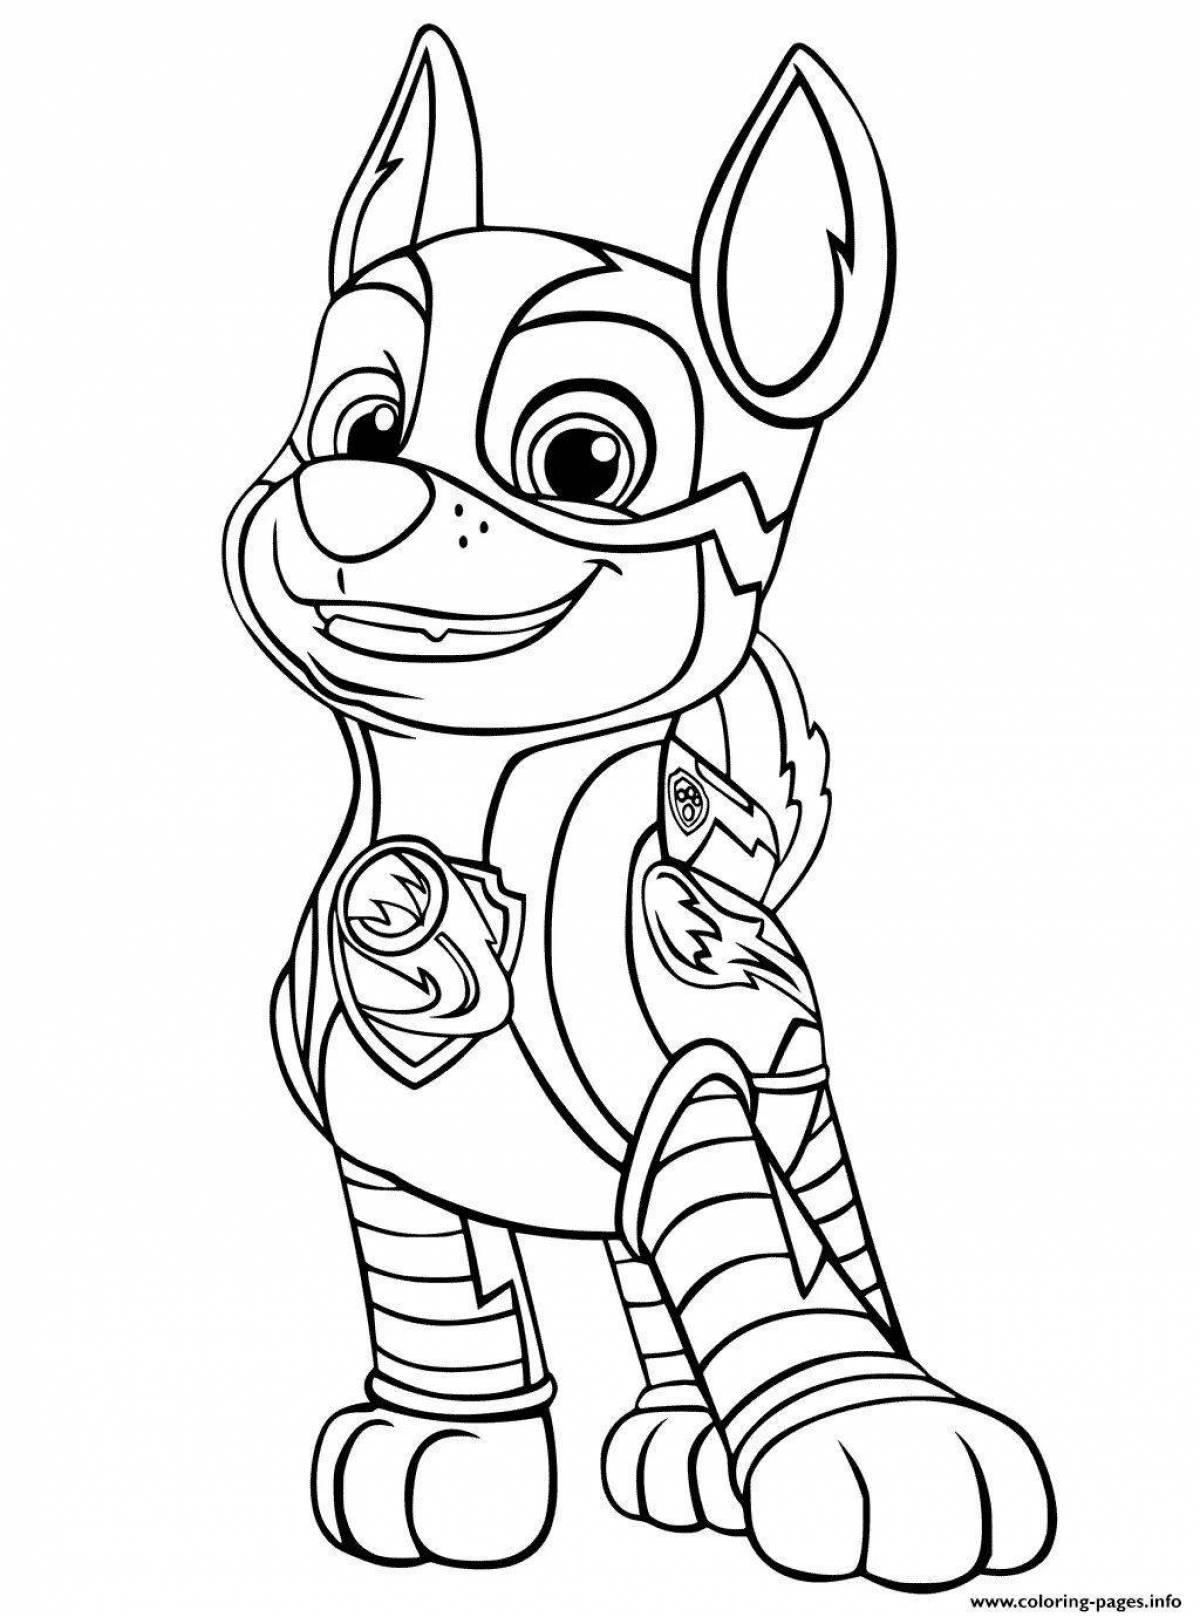 Coloring page gorgeous paw patrol puppies